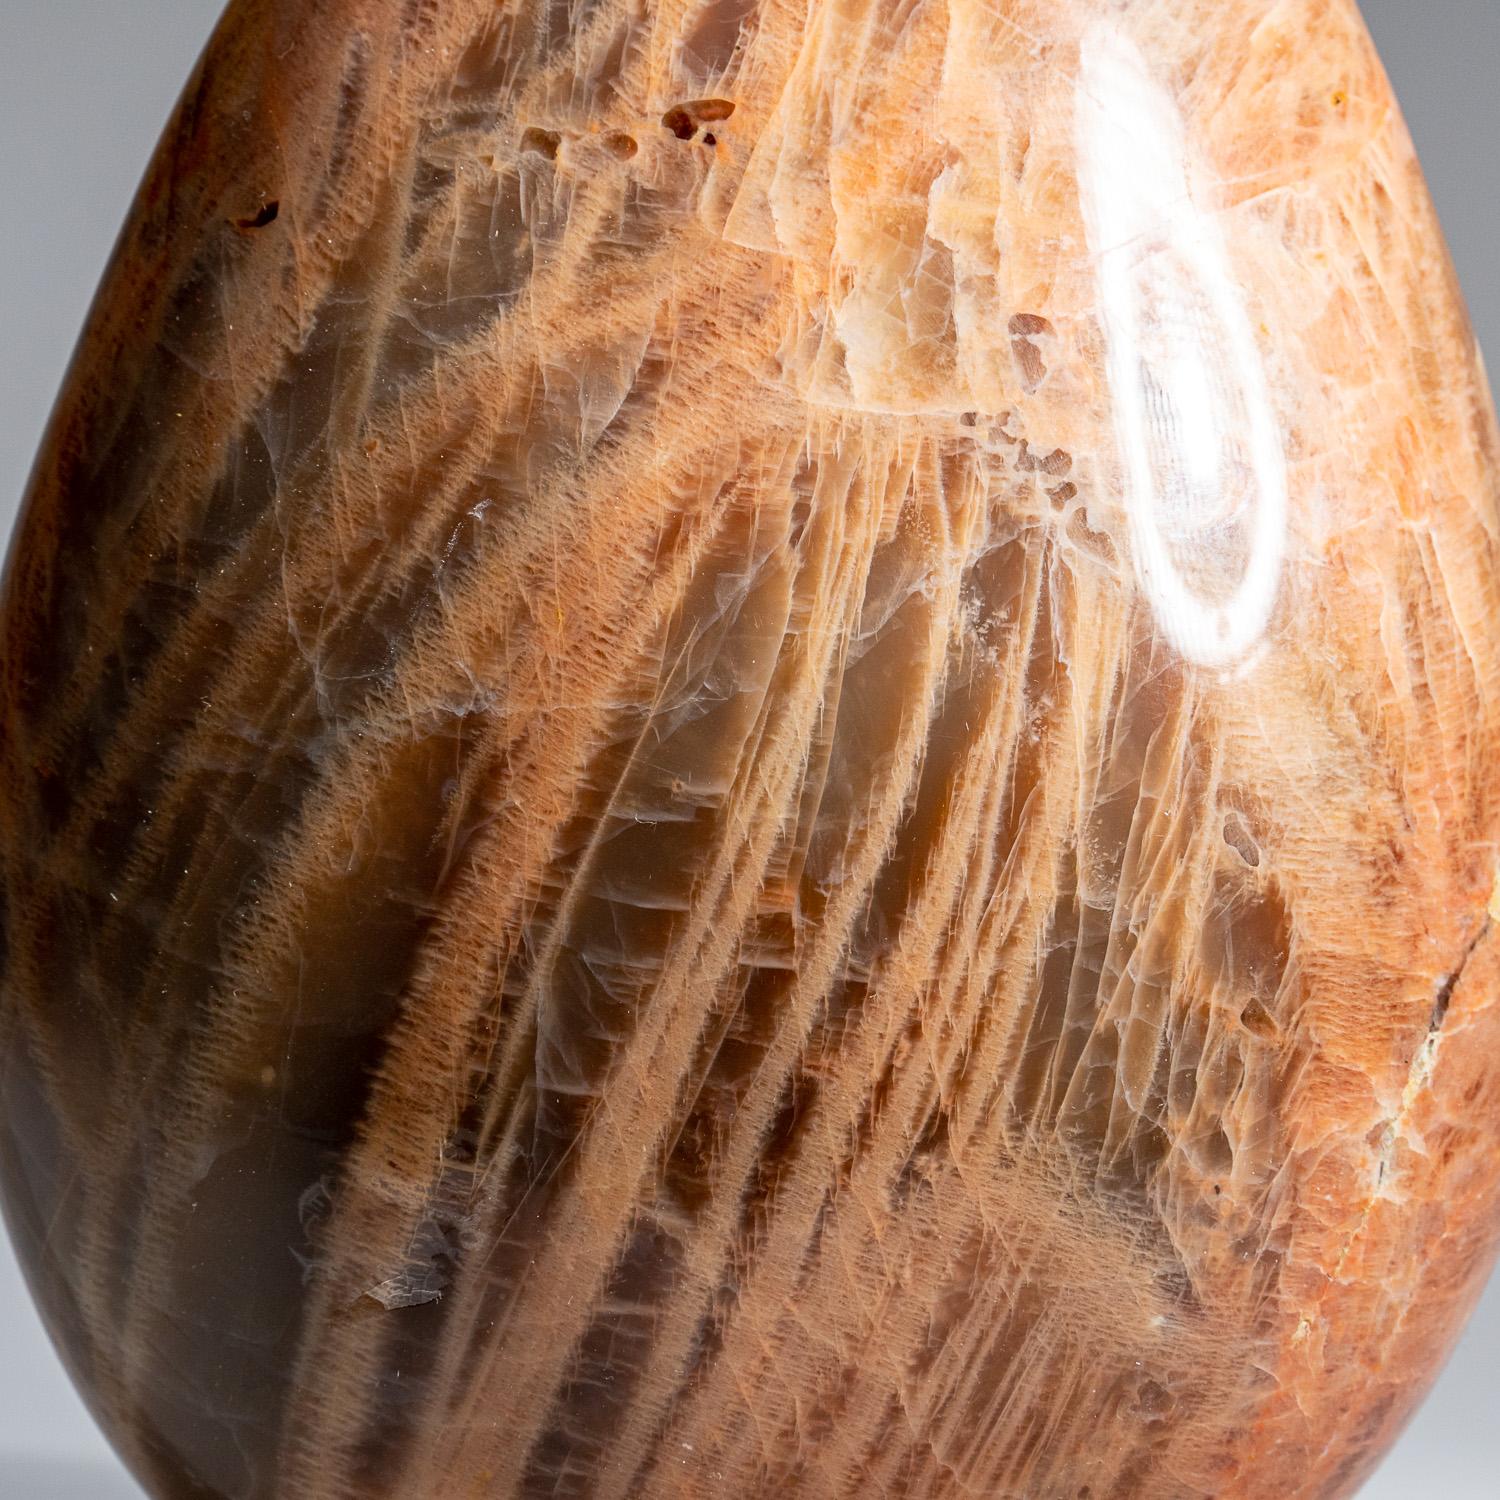 Contemporary Genuine Polished Peach Moonstone Freeform from Madagascar (6.8 lbs) For Sale